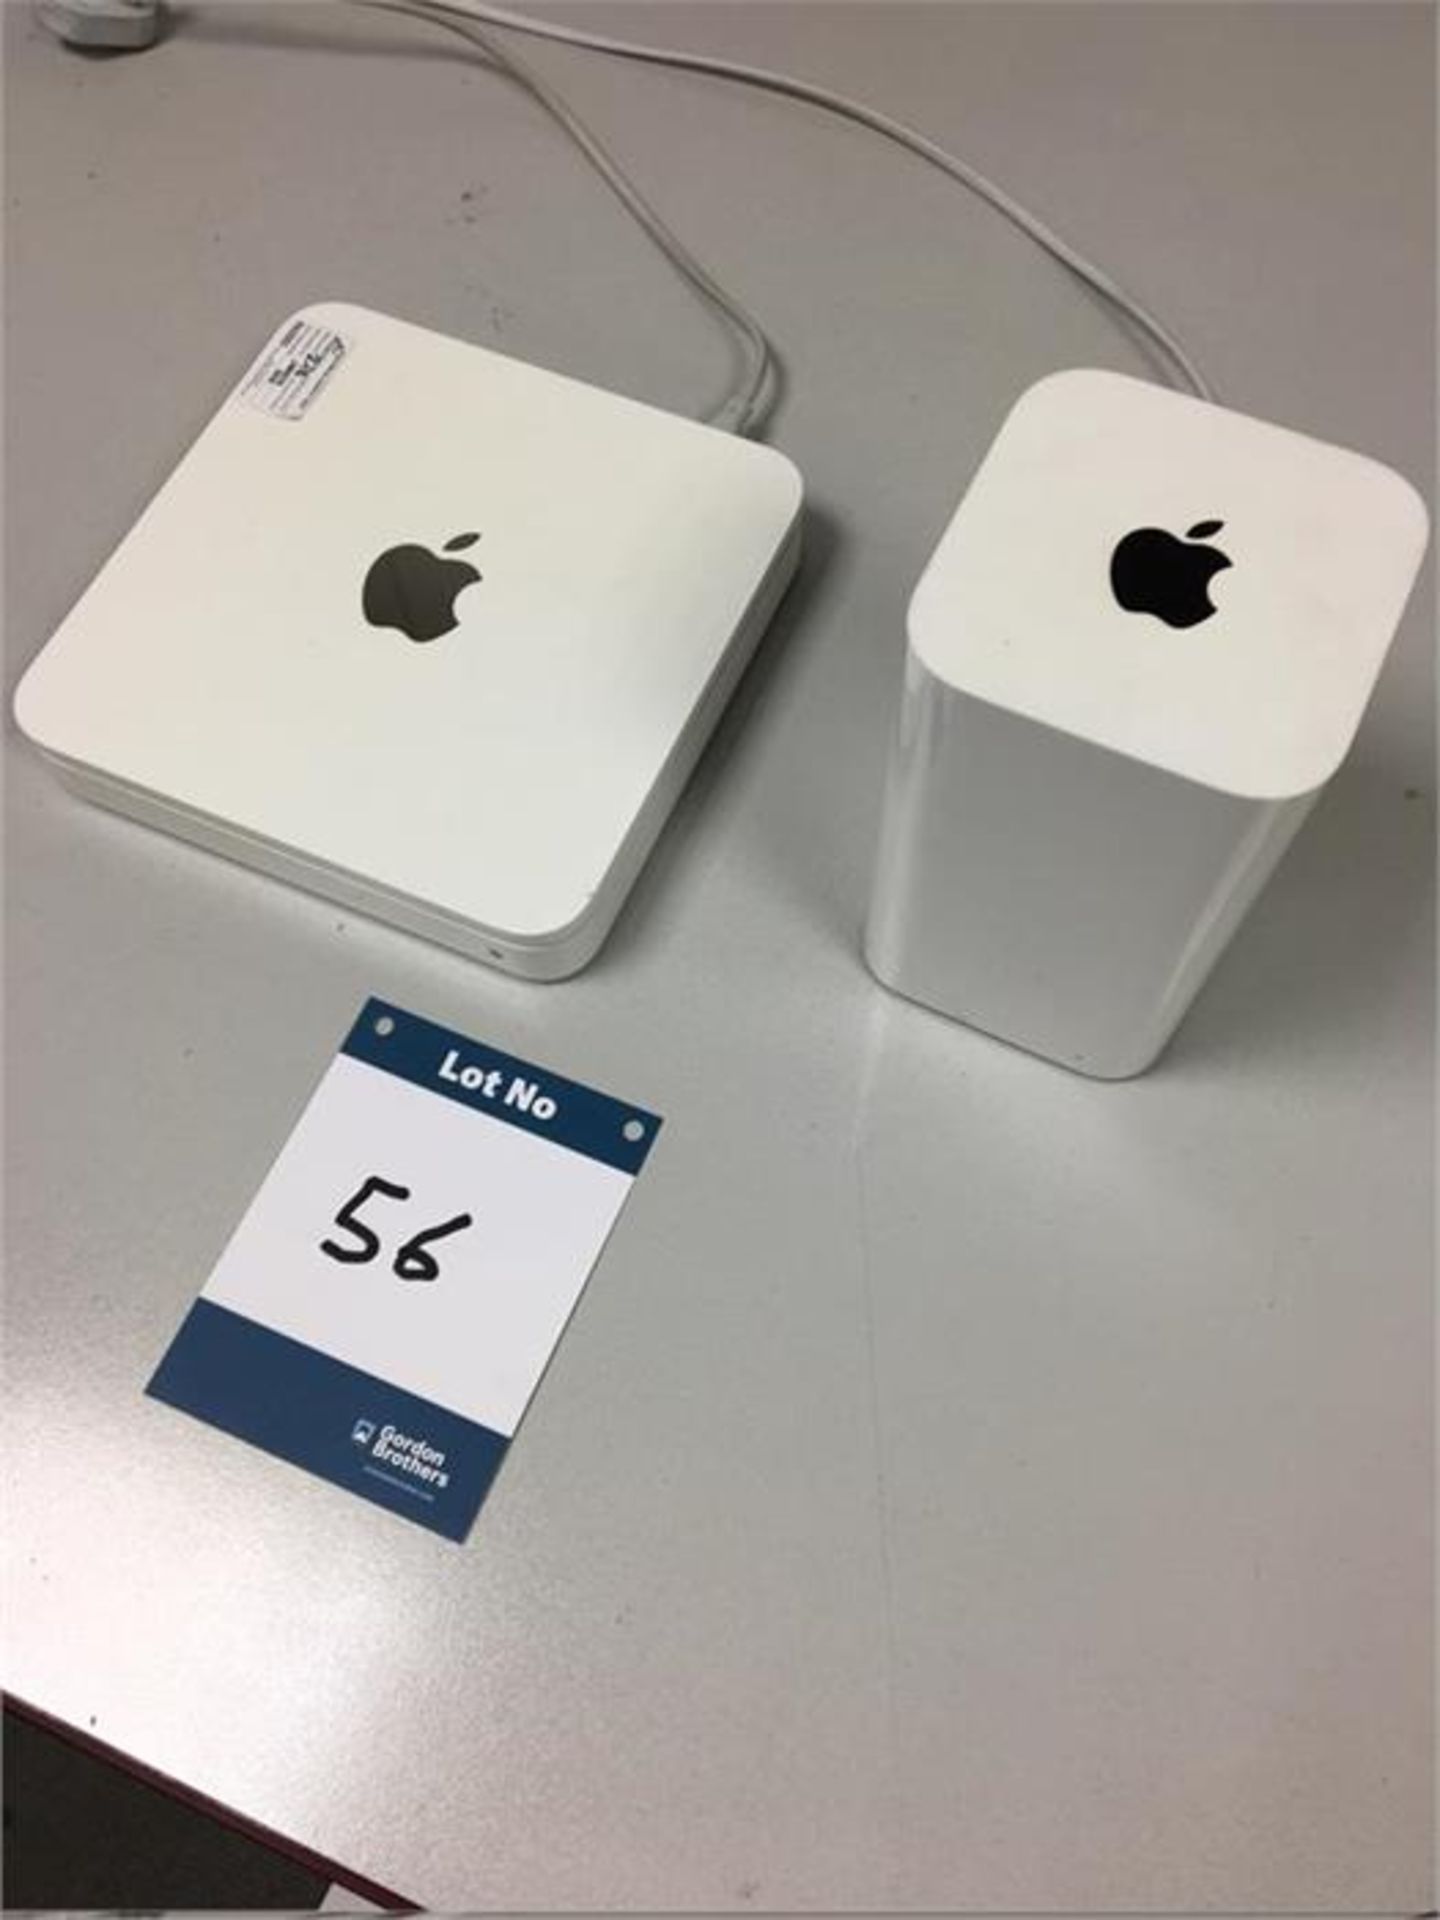 Apple AirPort Time Capsule, Model: A1470 and Apple Time Capsule, Model: A1355